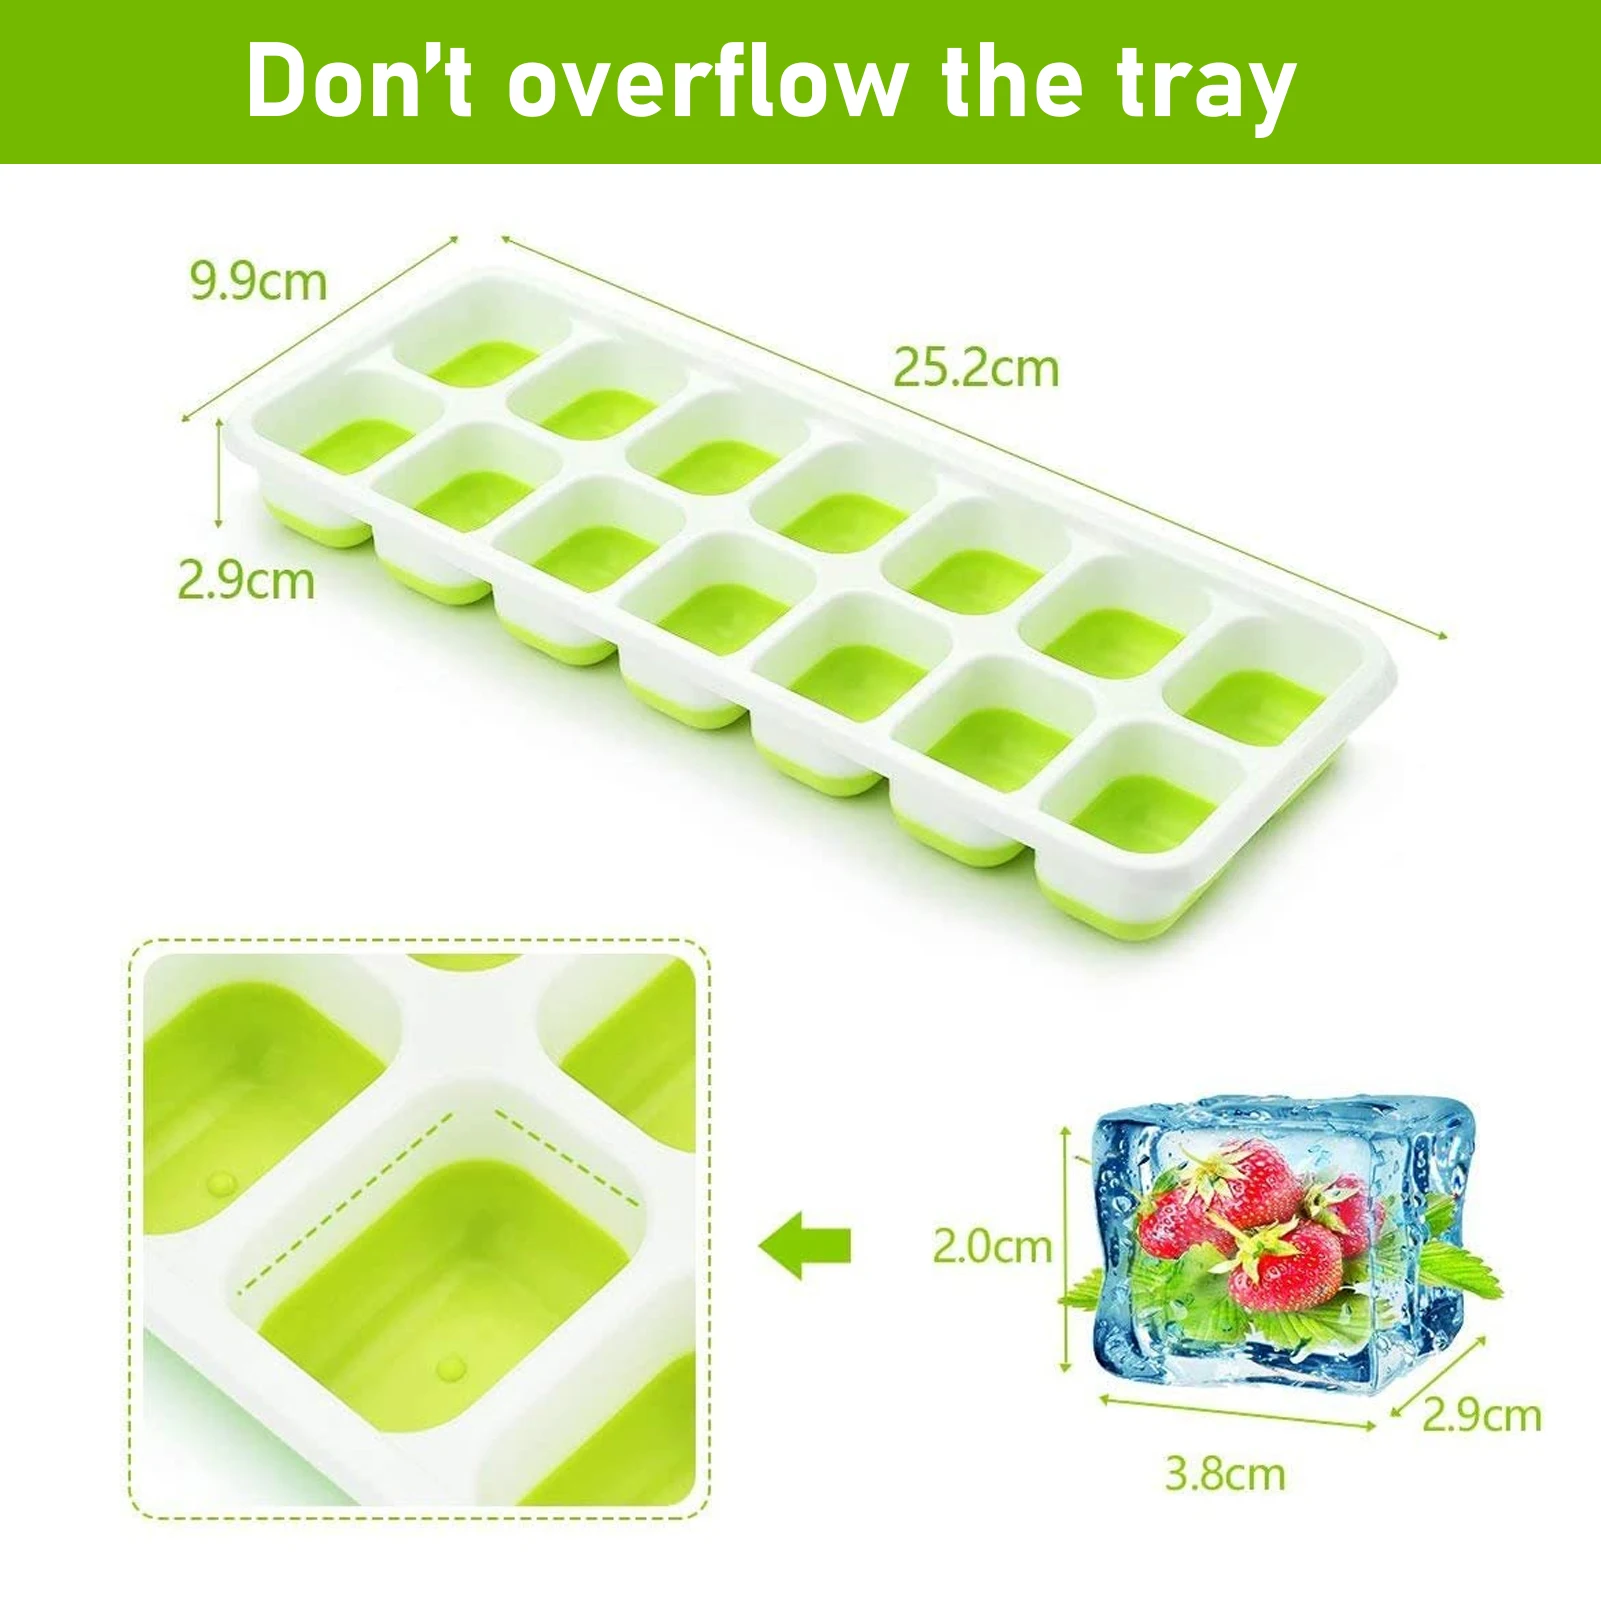 https://ae01.alicdn.com/kf/H4689ea609ff44ae28013e04a9da263d19/Kitchen-Ice-Cube-Trays-with-Lids-4-Pack-Easy-Release-Silicone-and-Flexible-14-Ice-Trays.jpg